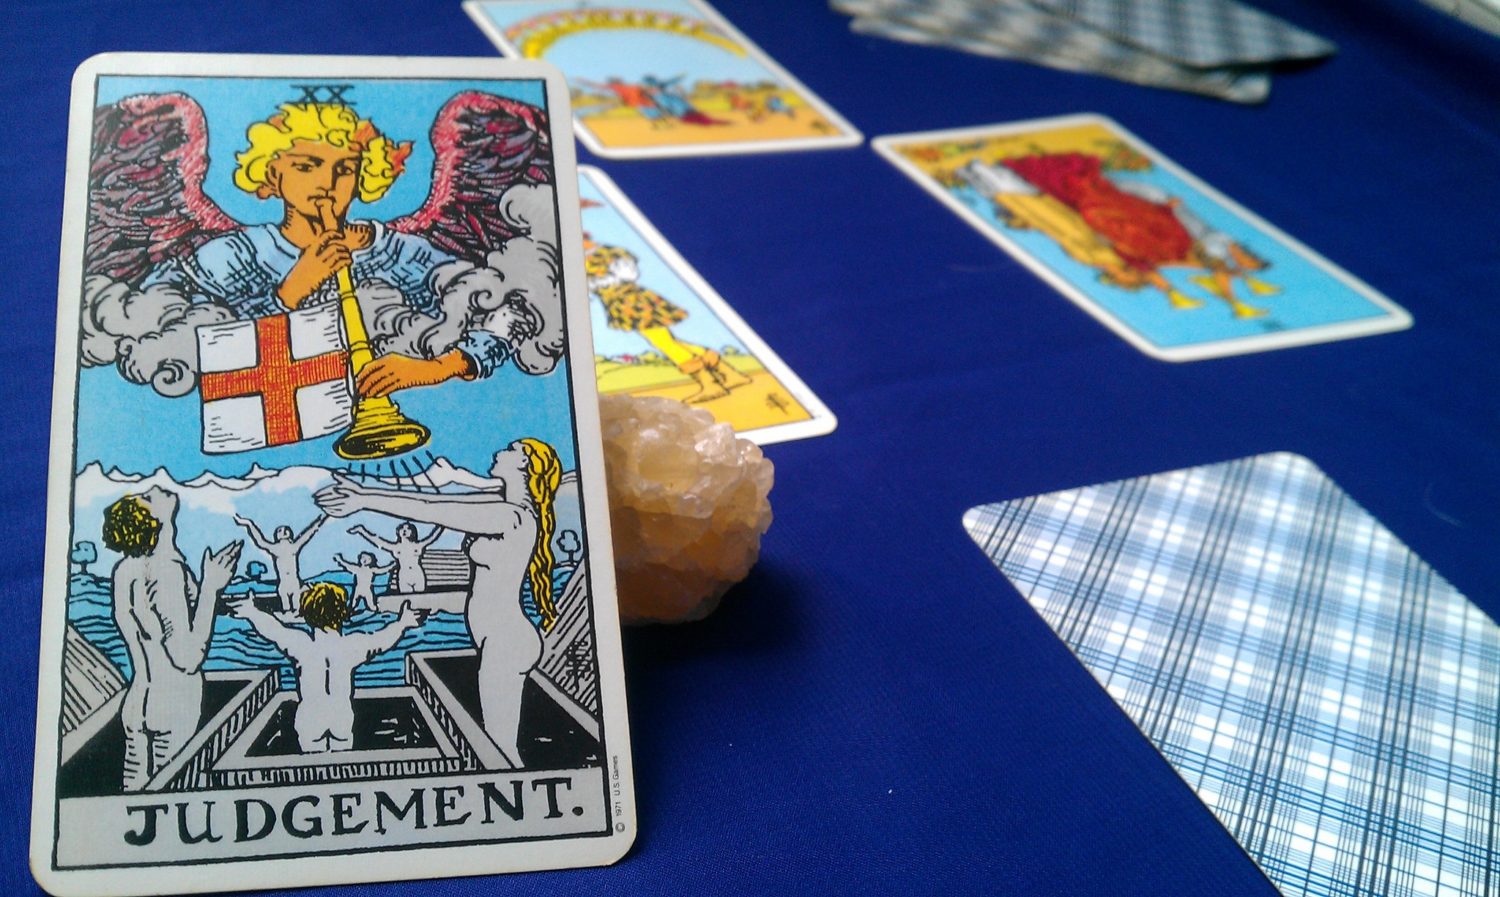 Can Tarot Readings Help With Our Self-Care?